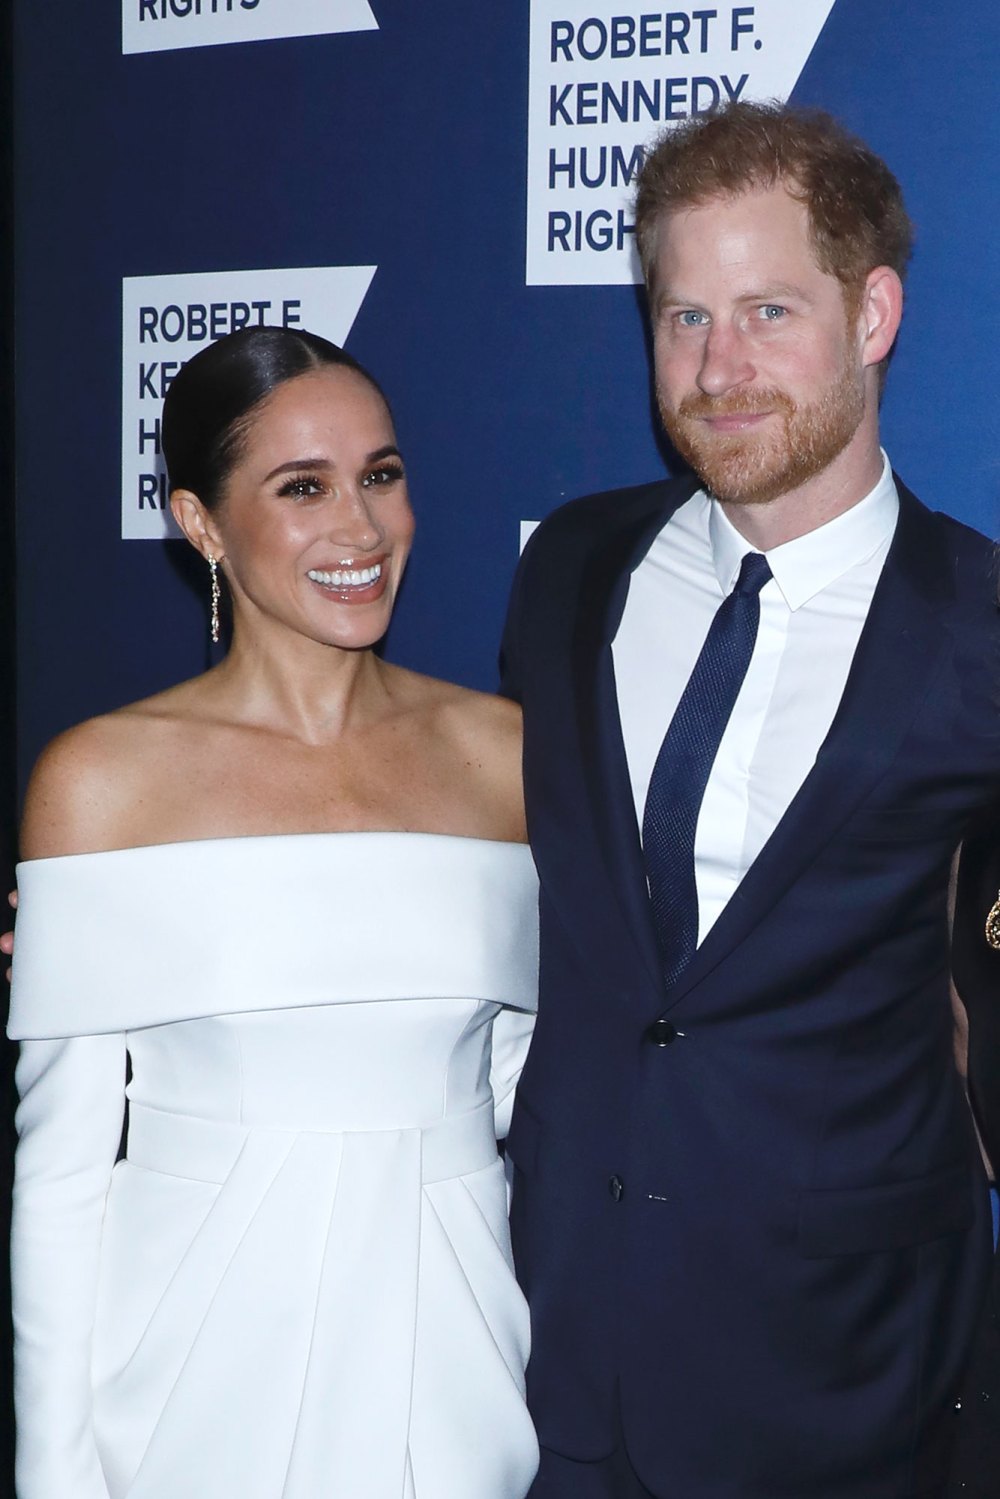 Prince Harry Recalls Seeing Meghan Markle for the 1st Time With the Dog Filter On 2